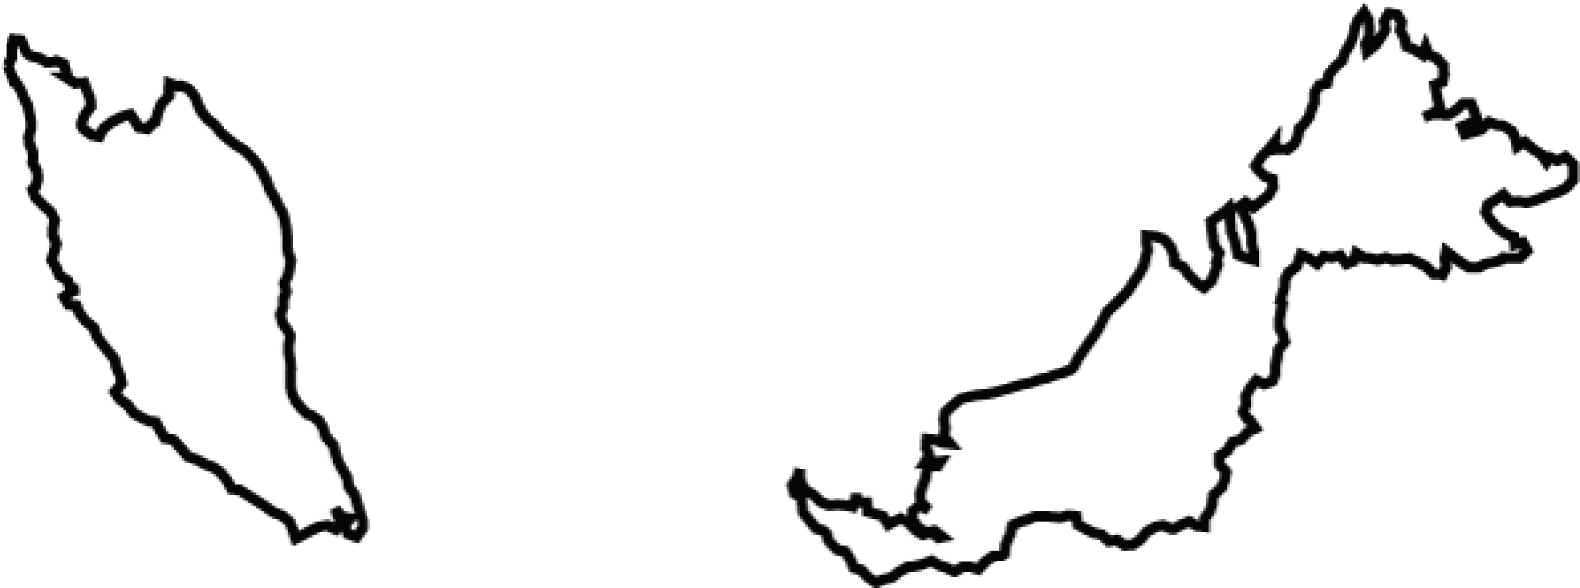 A White Outline Of A Map